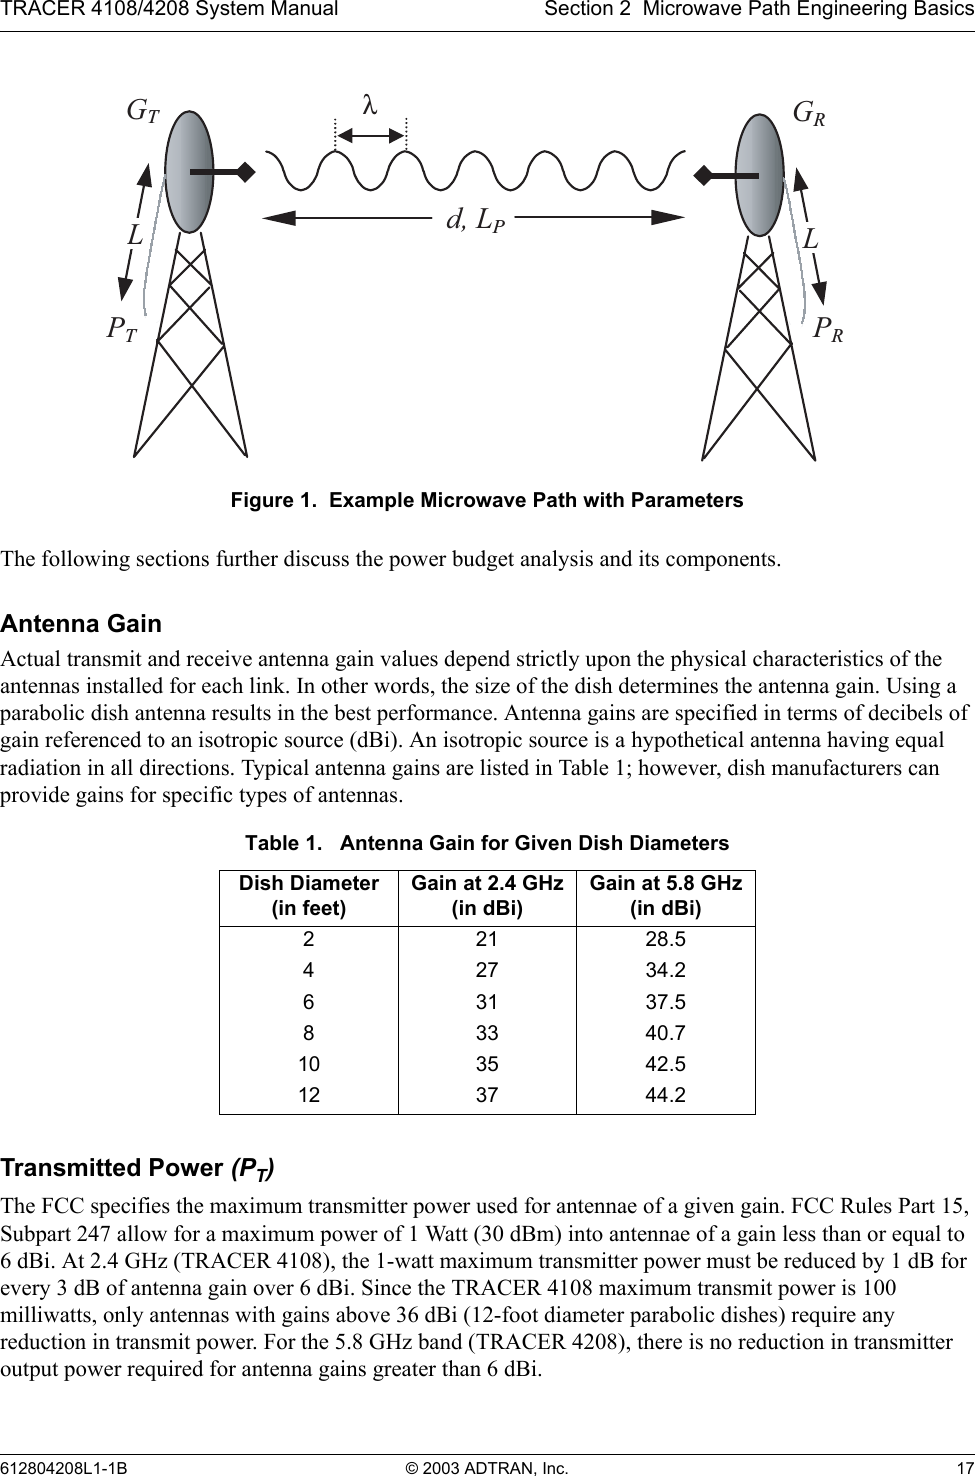 TRACER 4108/4208 System Manual Section 2  Microwave Path Engineering Basics612804208L1-1B © 2003 ADTRAN, Inc. 17Figure 1.  Example Microwave Path with ParametersThe following sections further discuss the power budget analysis and its components.Antenna GainActual transmit and receive antenna gain values depend strictly upon the physical characteristics of the antennas installed for each link. In other words, the size of the dish determines the antenna gain. Using a parabolic dish antenna results in the best performance. Antenna gains are specified in terms of decibels of gain referenced to an isotropic source (dBi). An isotropic source is a hypothetical antenna having equal radiation in all directions. Typical antenna gains are listed in Table 1; however, dish manufacturers can provide gains for specific types of antennas.Transmitted Power (PT)The FCC specifies the maximum transmitter power used for antennae of a given gain. FCC Rules Part 15, Subpart 247 allow for a maximum power of 1 Watt (30 dBm) into antennae of a gain less than or equal to 6 dBi. At 2.4 GHz (TRACER 4108), the 1-watt maximum transmitter power must be reduced by 1 dB for every 3 dB of antenna gain over 6 dBi. Since the TRACER 4108 maximum transmit power is 100 milliwatts, only antennas with gains above 36 dBi (12-foot diameter parabolic dishes) require any reduction in transmit power. For the 5.8 GHz band (TRACER 4208), there is no reduction in transmitter output power required for antenna gains greater than 6 dBi.Table 1.   Antenna Gain for Given Dish DiametersDish Diameter(in feet)Gain at 2.4 GHz(in dBi)Gain at 5.8 GHz(in dBi)2 21 28.54 27 34.26 31 37.58 33 40.710 35 42.512 37 44.2 GTGRd, LPPTPRλLL